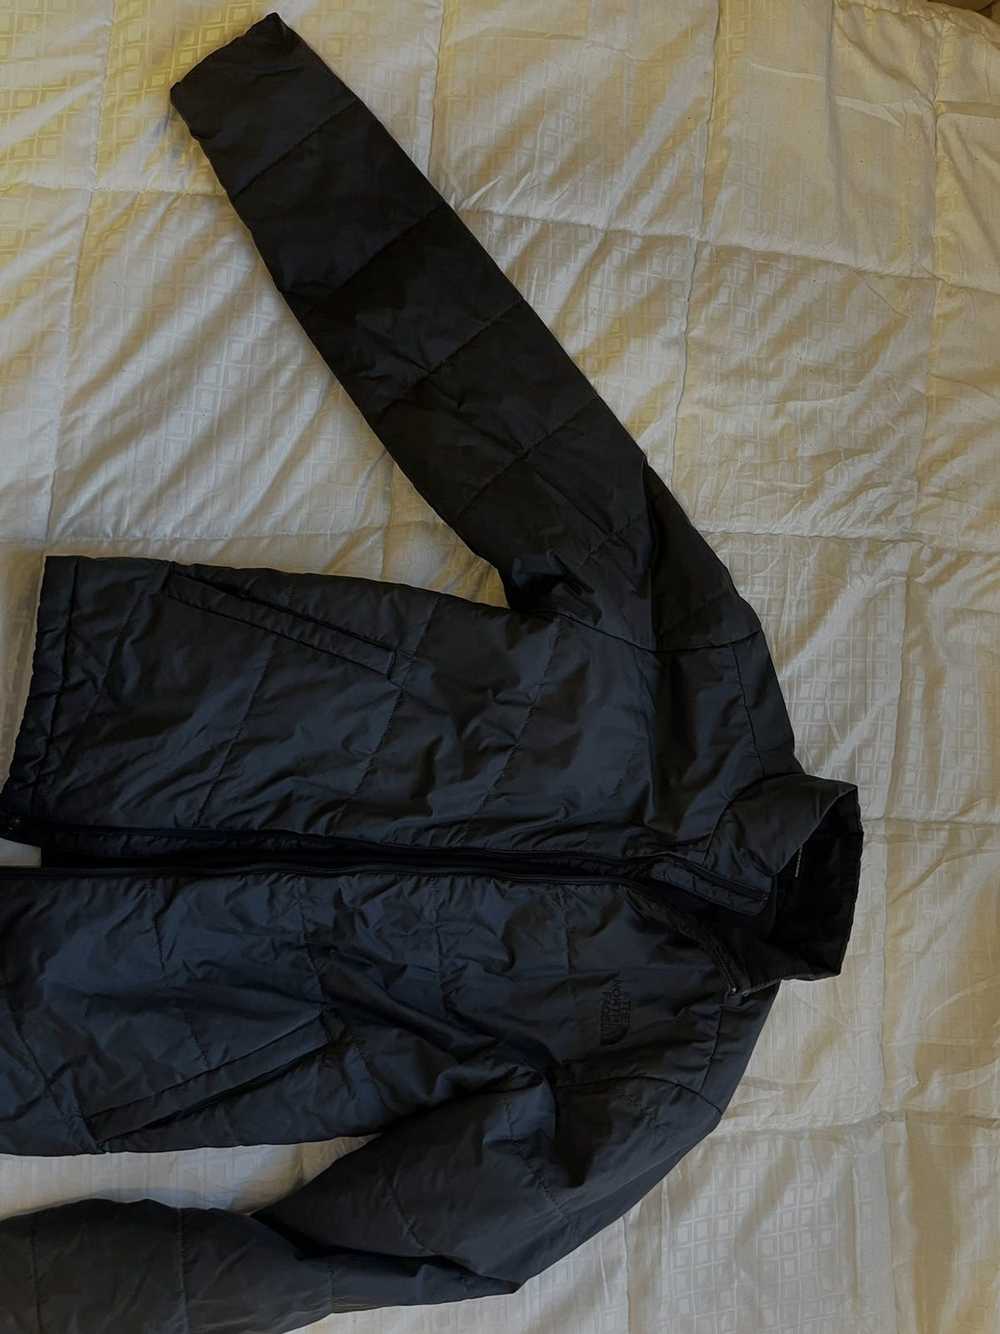 The North Face North Face Jacket - image 3